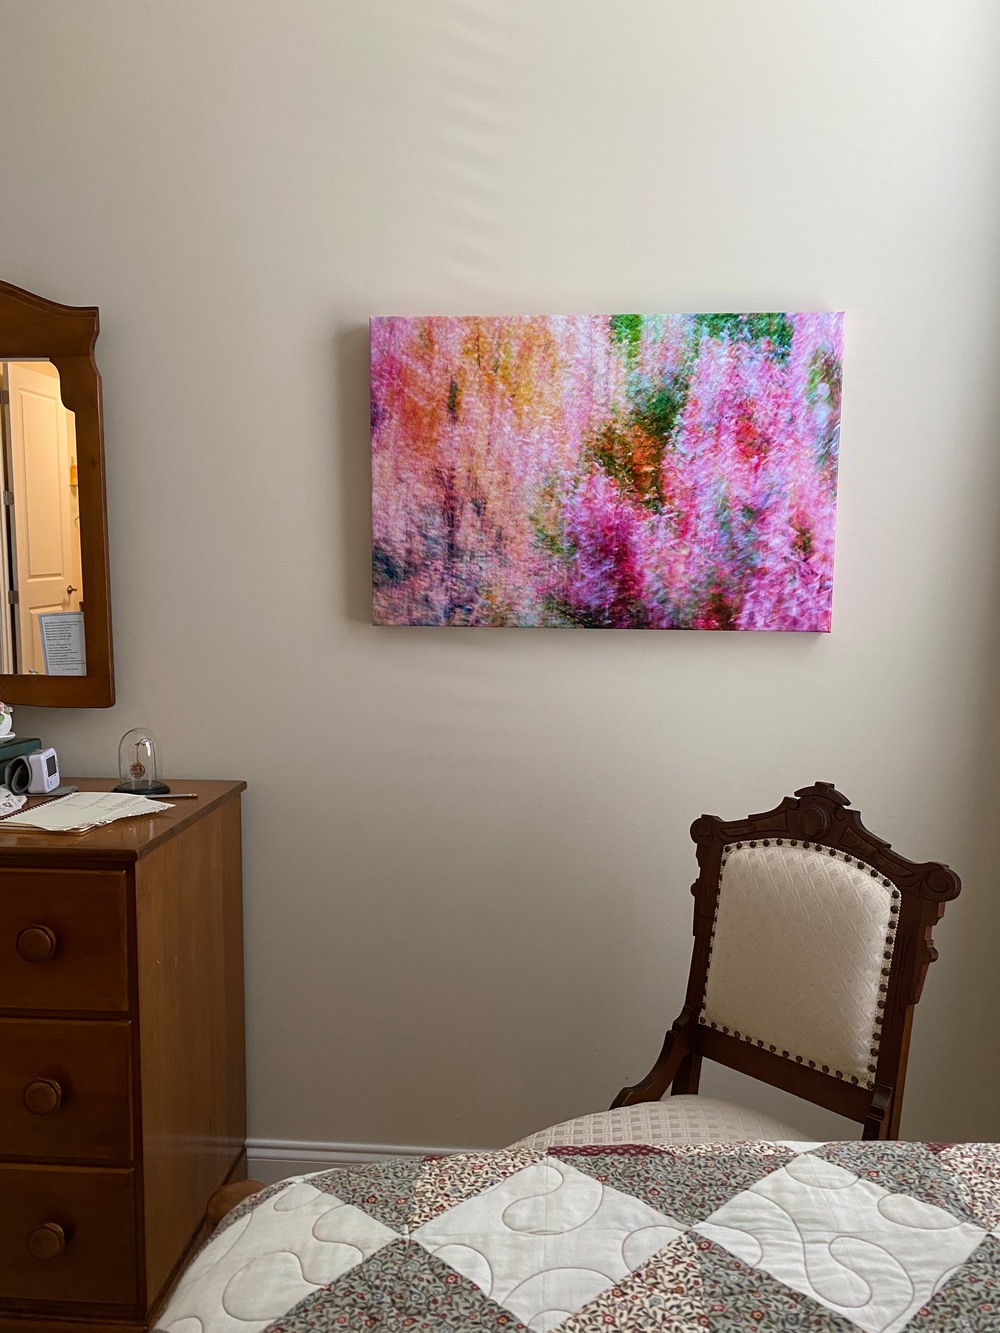 Photo of an abstract photo printed on canvas hanging in a room.